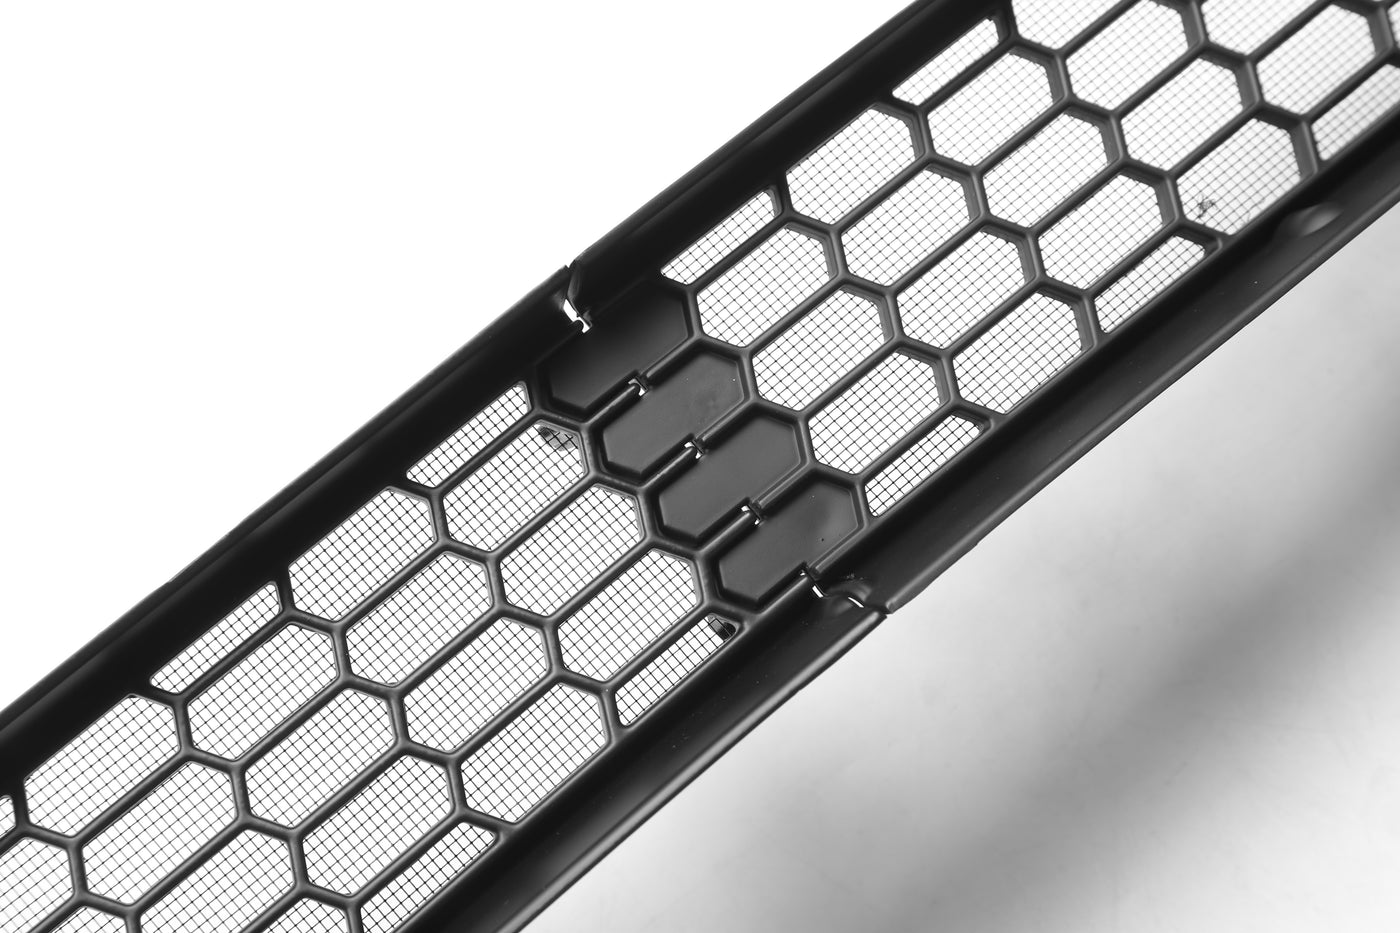 Turoaz Front Grill Mesh Grille Grid Inserts compatible with Tesla Mode